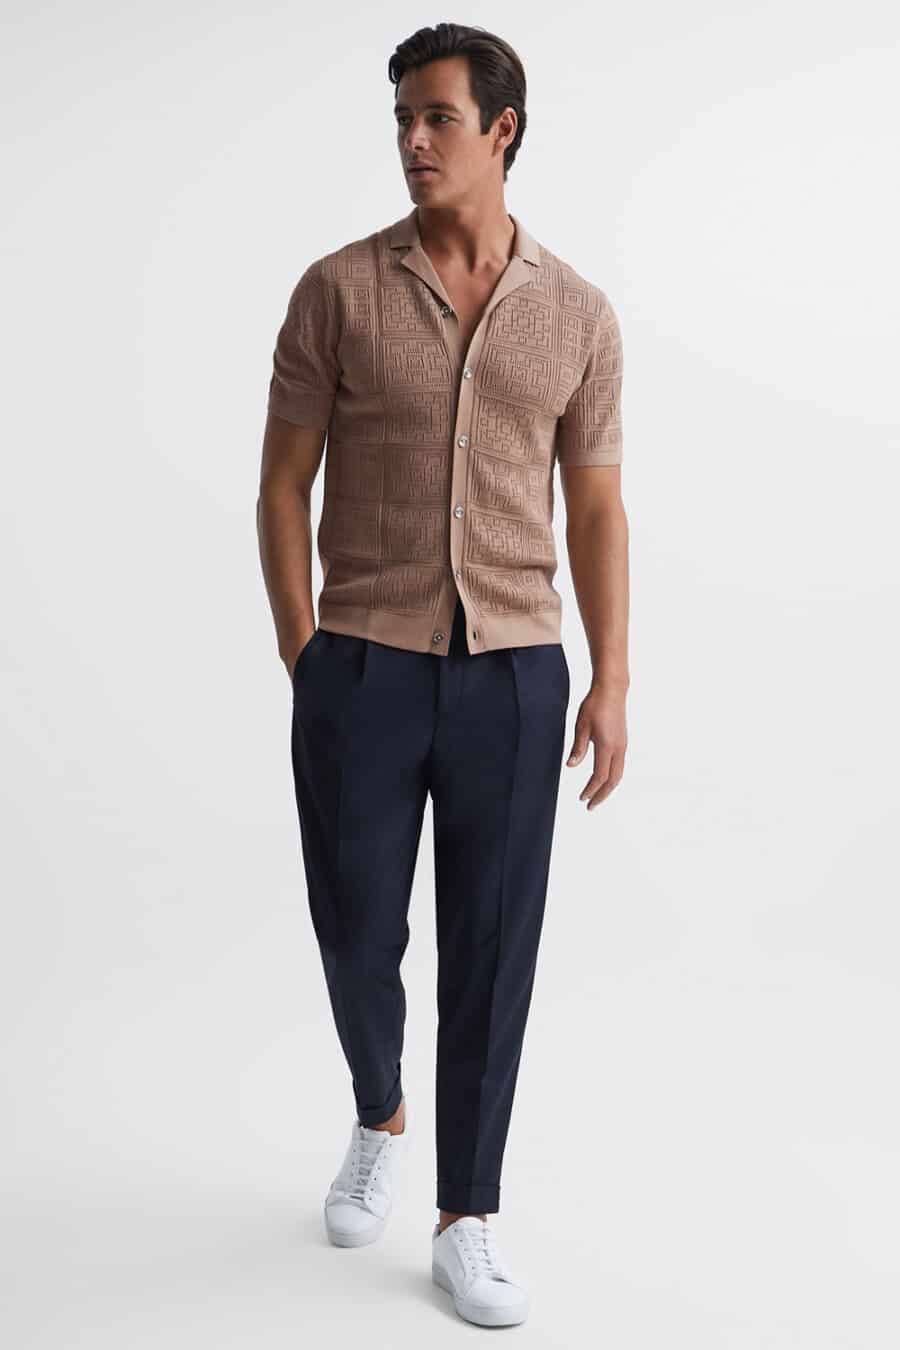 Men's navy tapered pants, brown short-sleeve knitted shirt and white sneakers worn sockless outfit